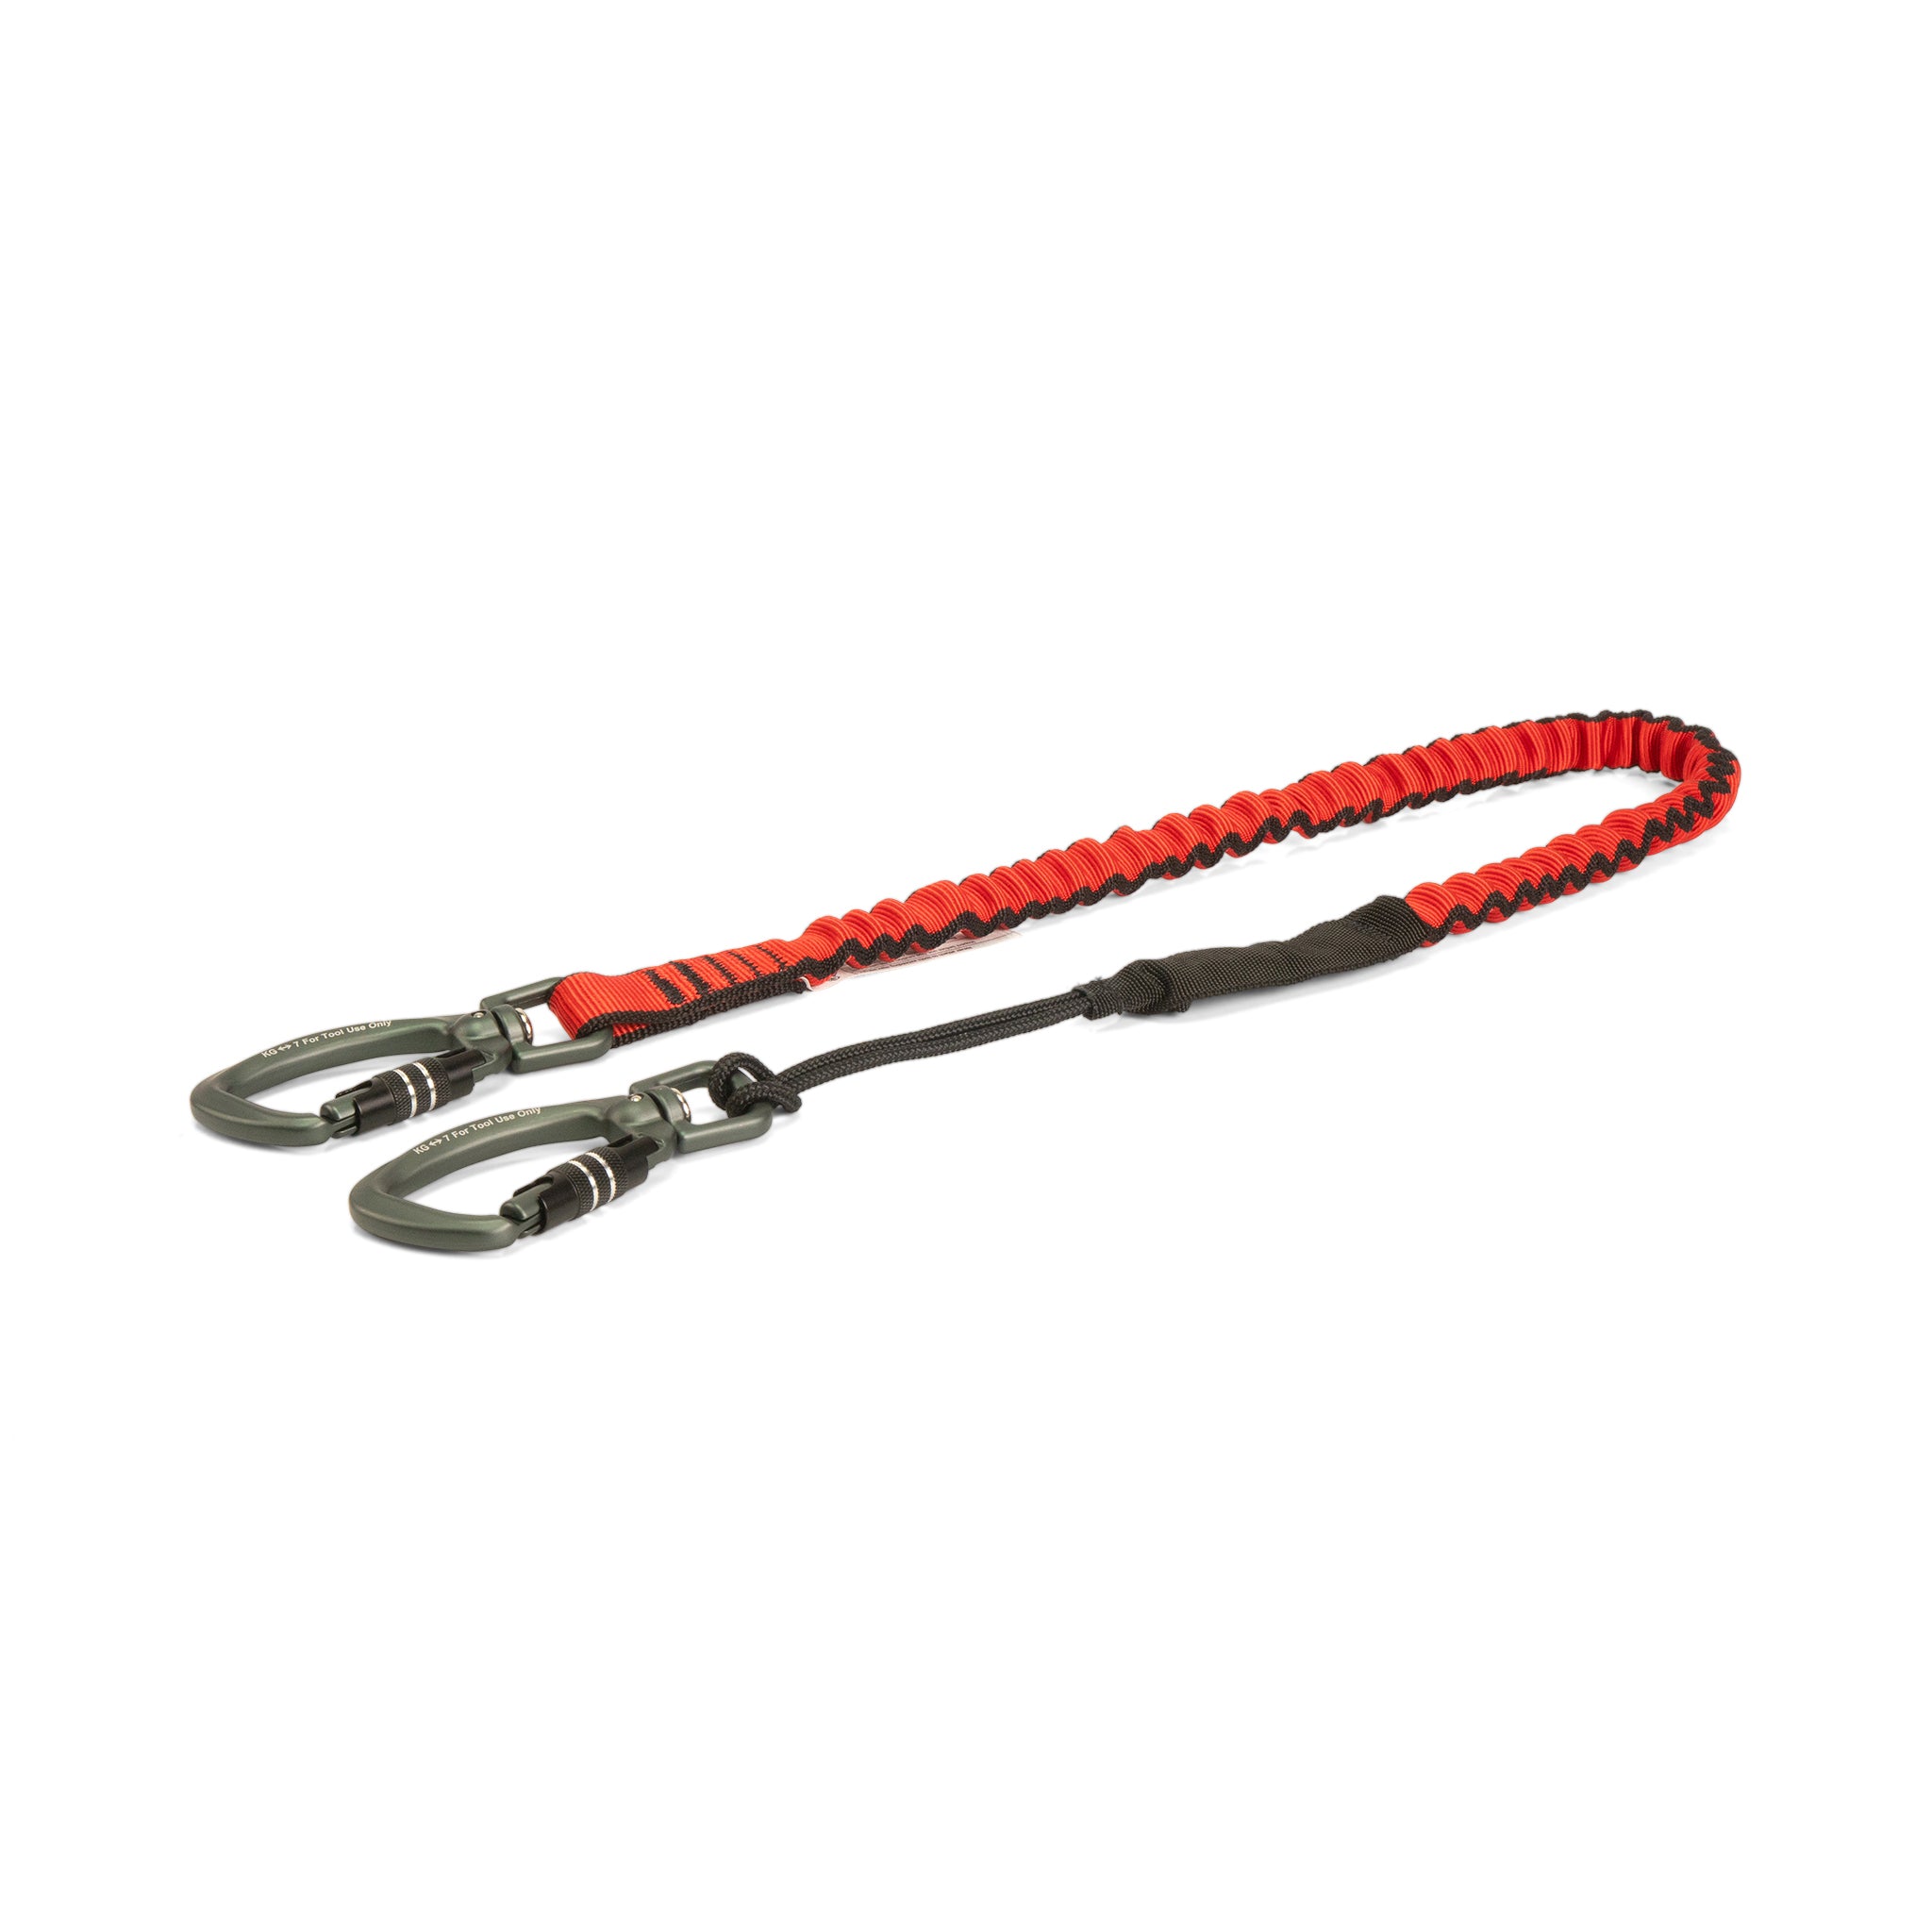 Bungee Tether Dual Carabiner Dual-Action - 7.0kg